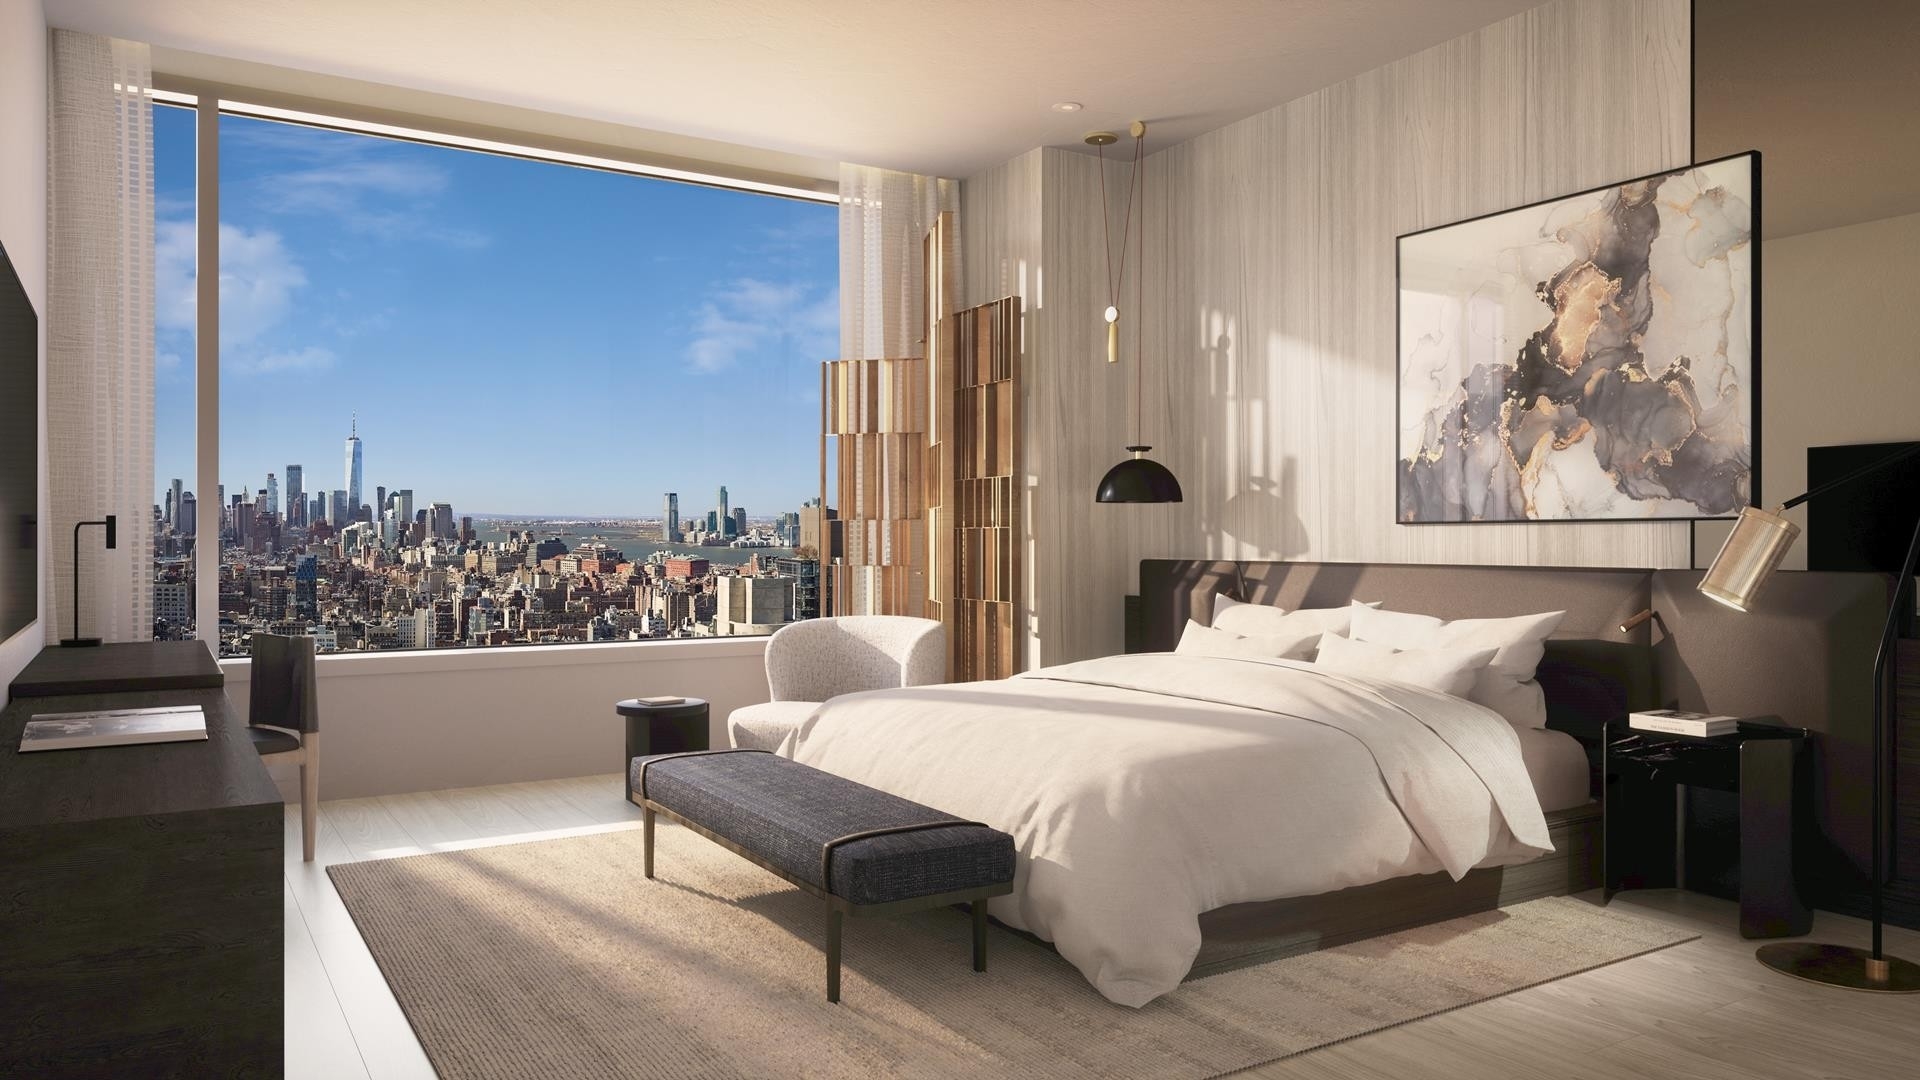 Condominium for Sale at The Ritz-Carlton Residences, New York, Nomad, 25 W 28TH ST, PH42D NoMad, New York, NY 10001